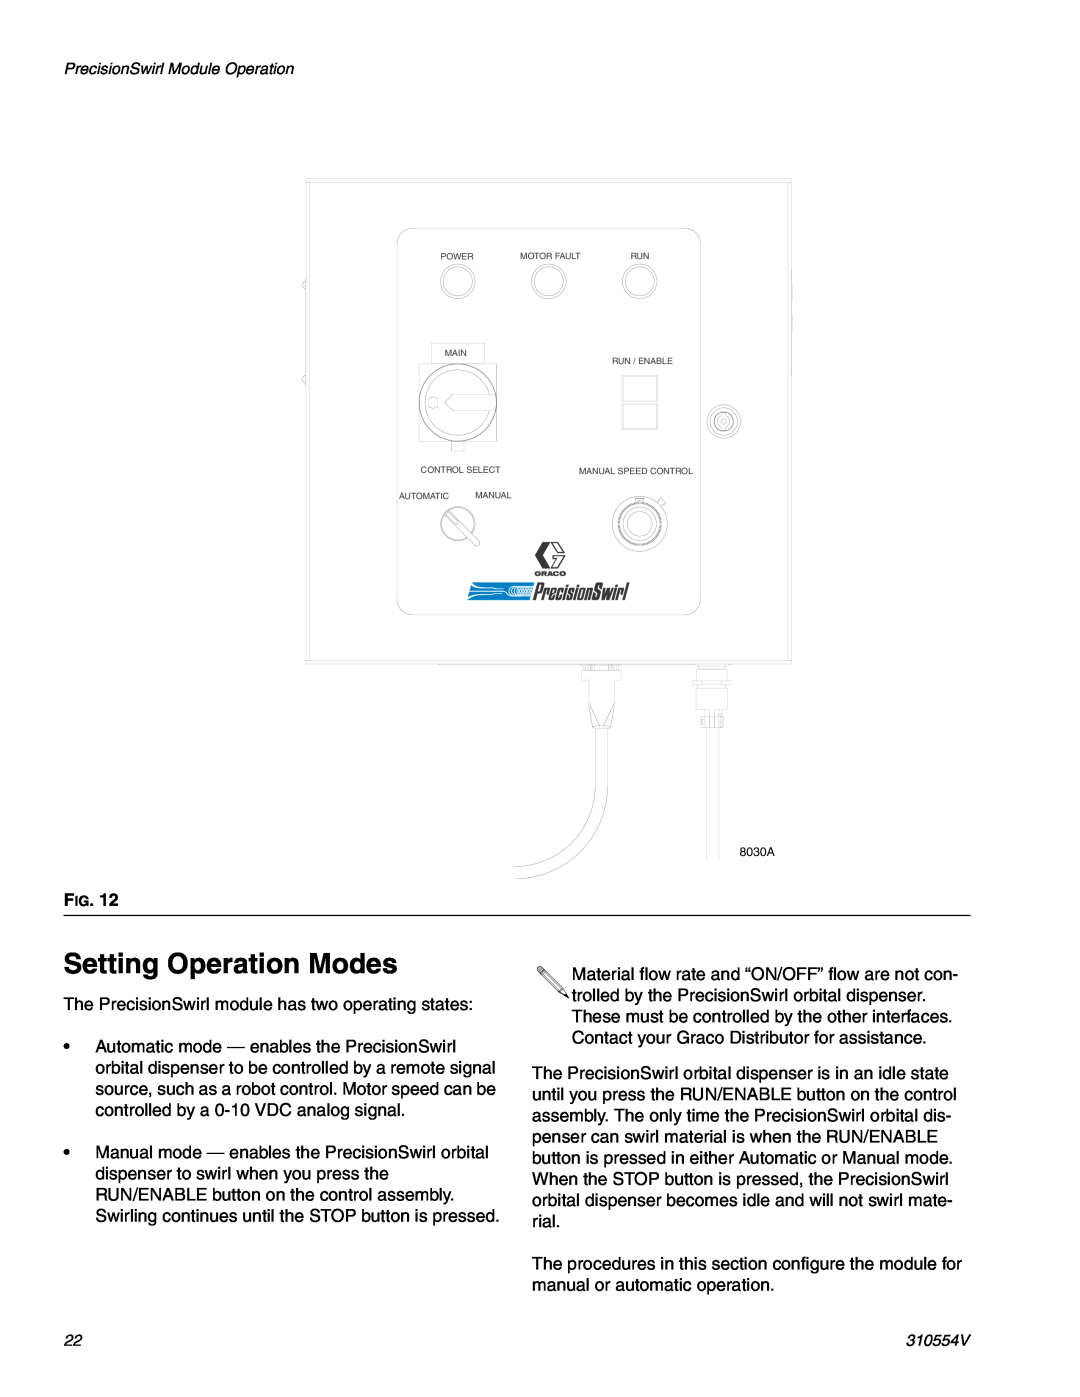 Graco 310554V important safety instructions Setting Operation Modes, 8030A 